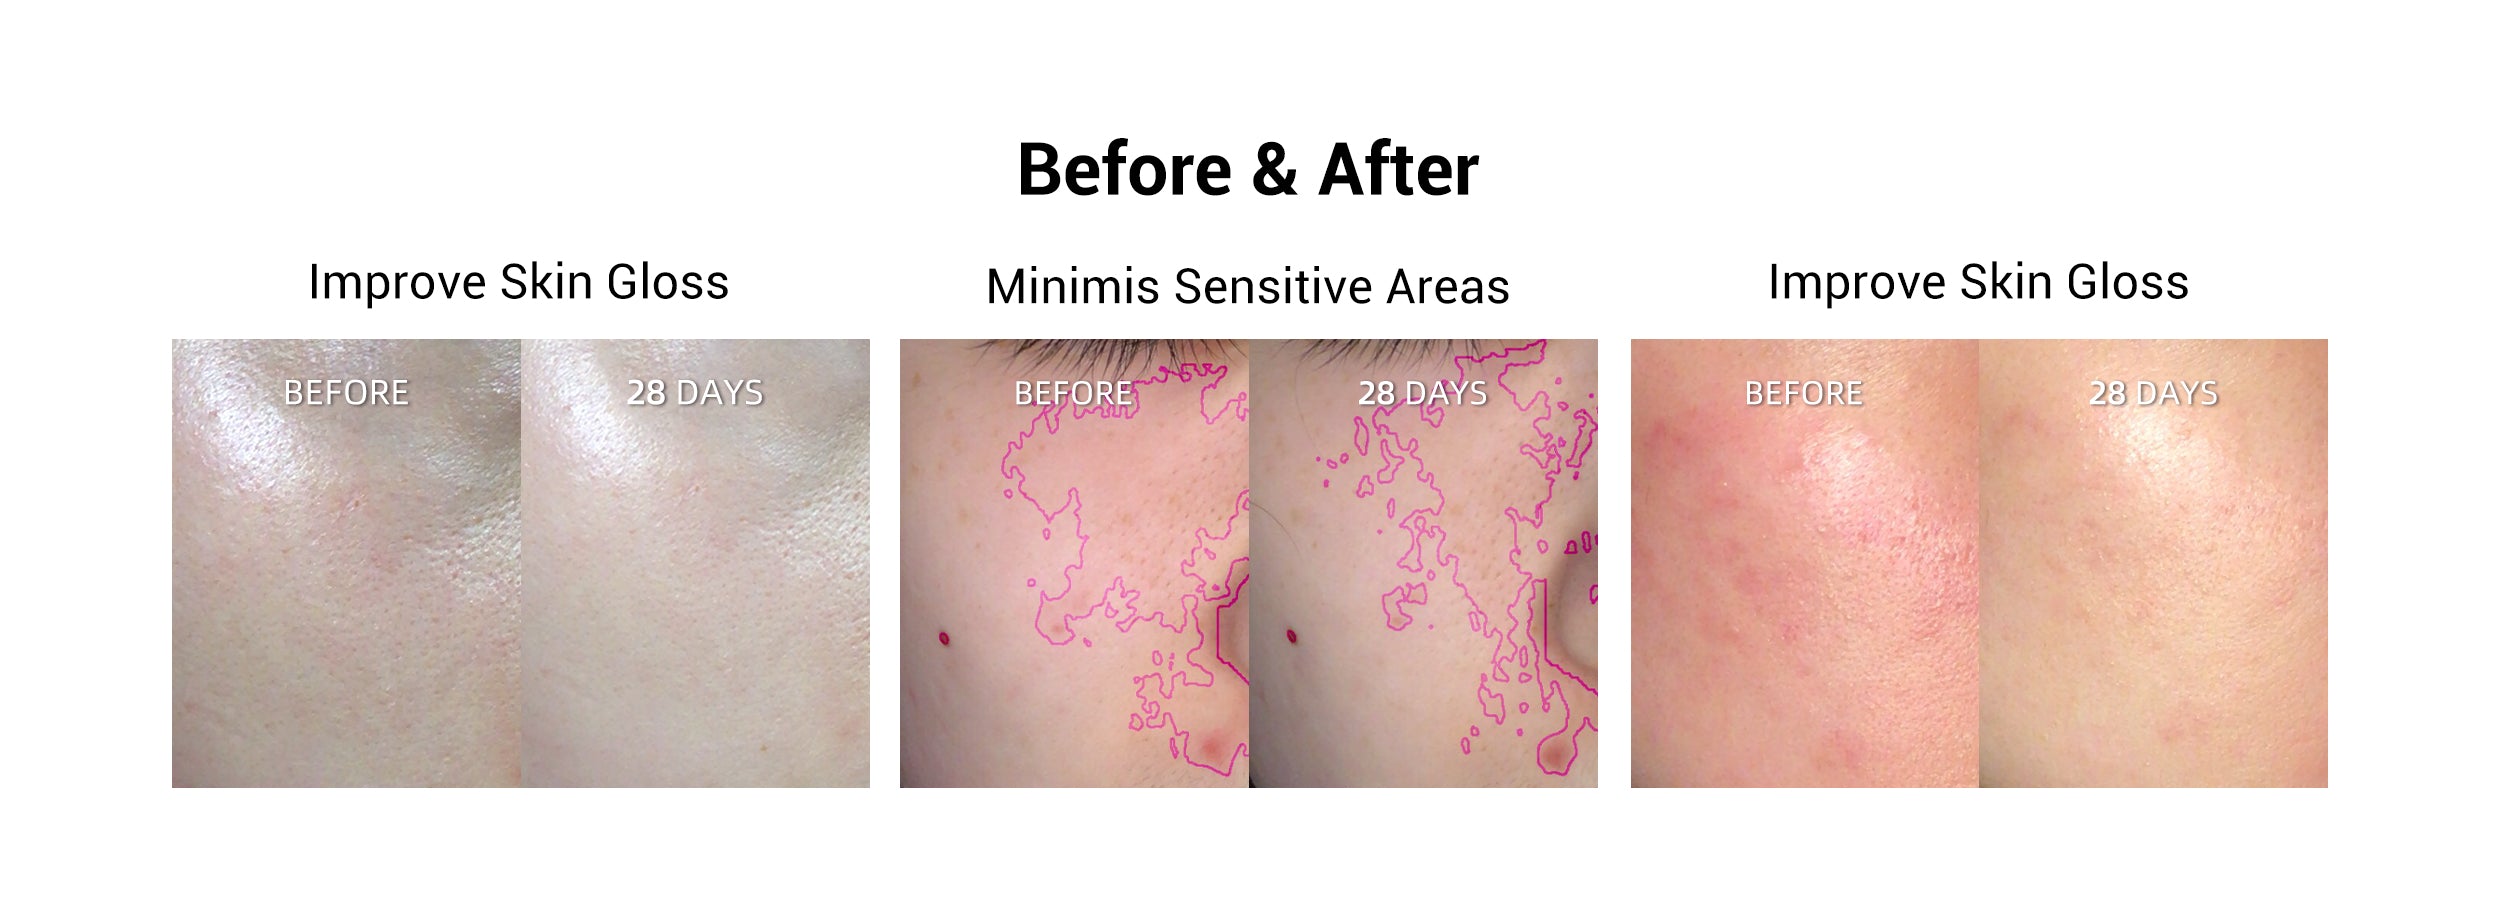 Before and after images showing improvement in skin gloss and reduction of sensitive areas after 28 days of LED light treatment.